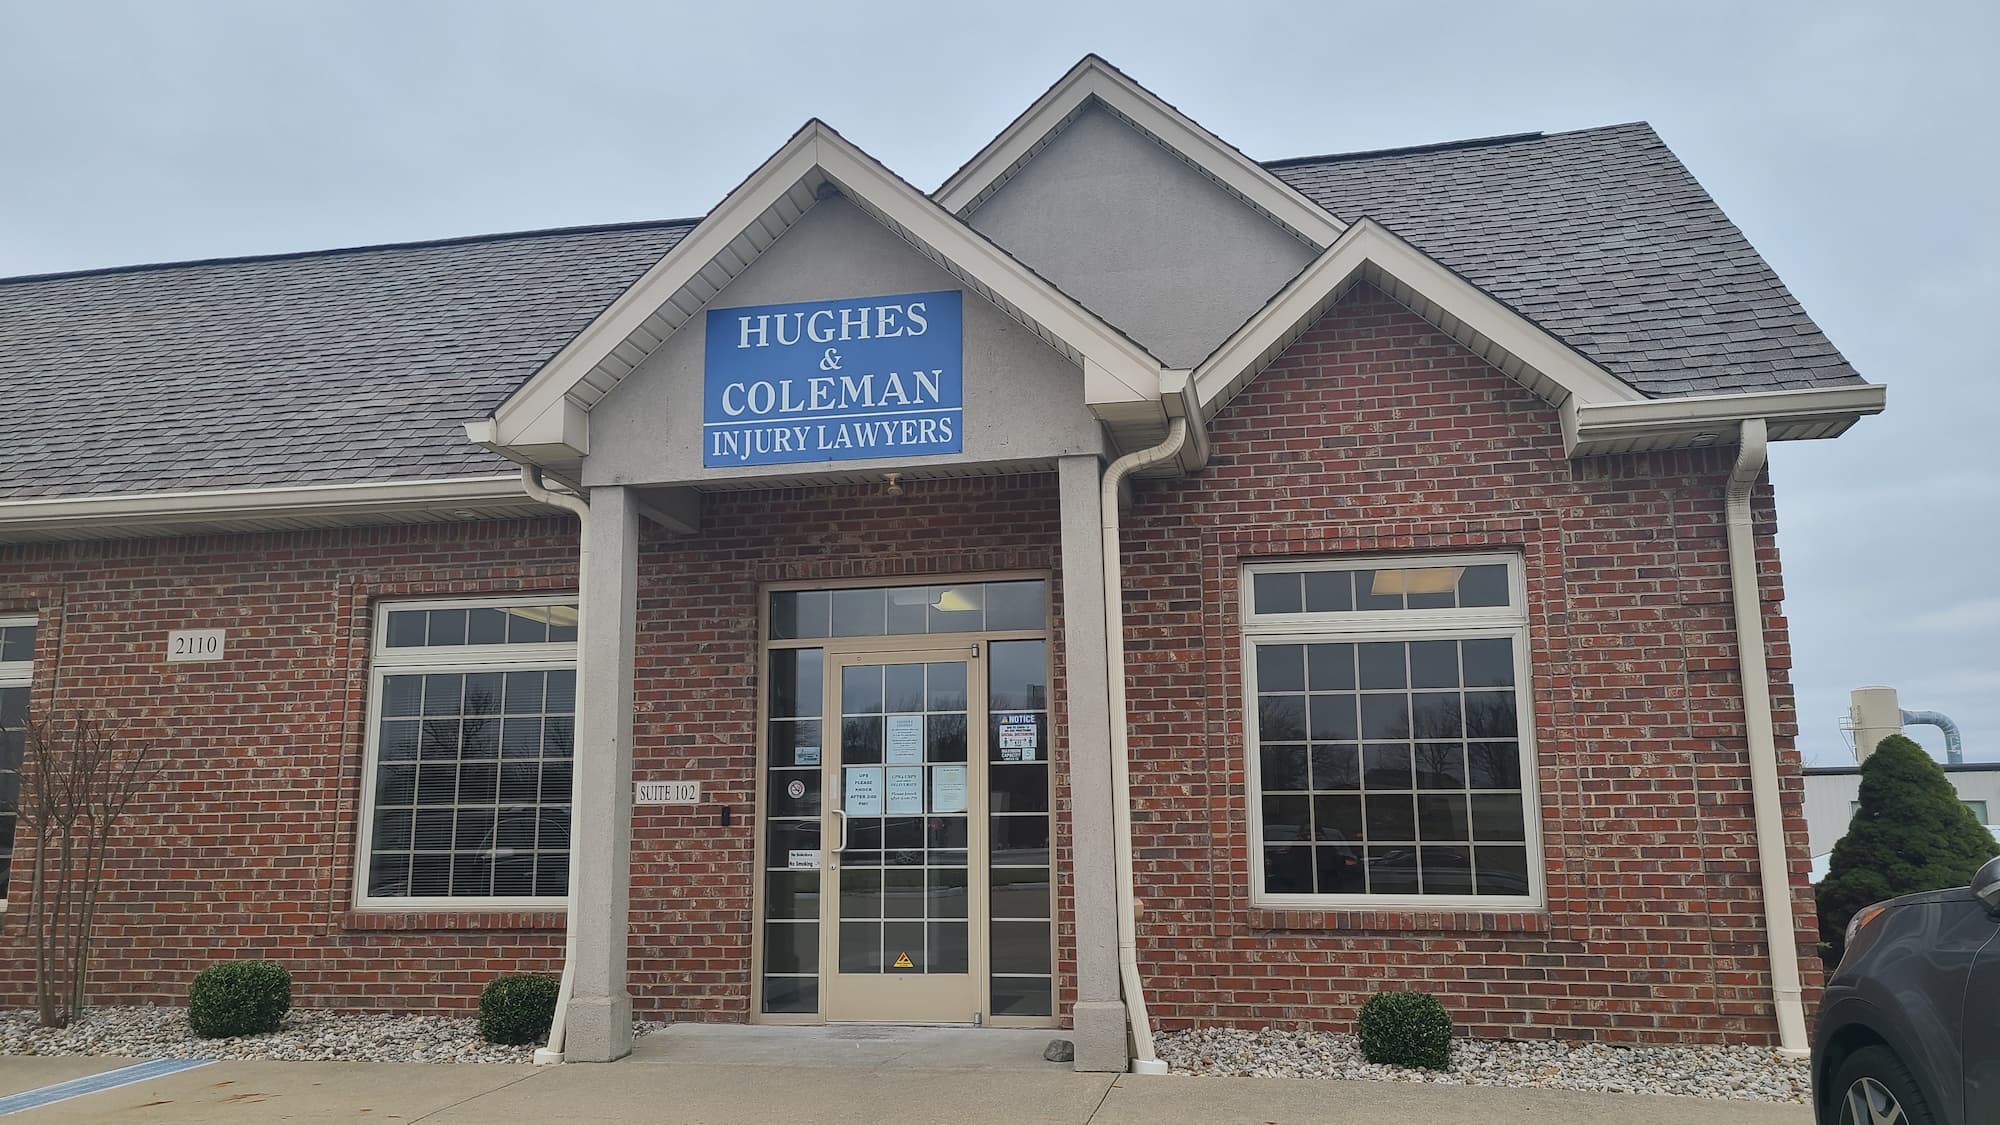 Hughes & Coleman Injury Lawyers office in Elizabethtown, KY